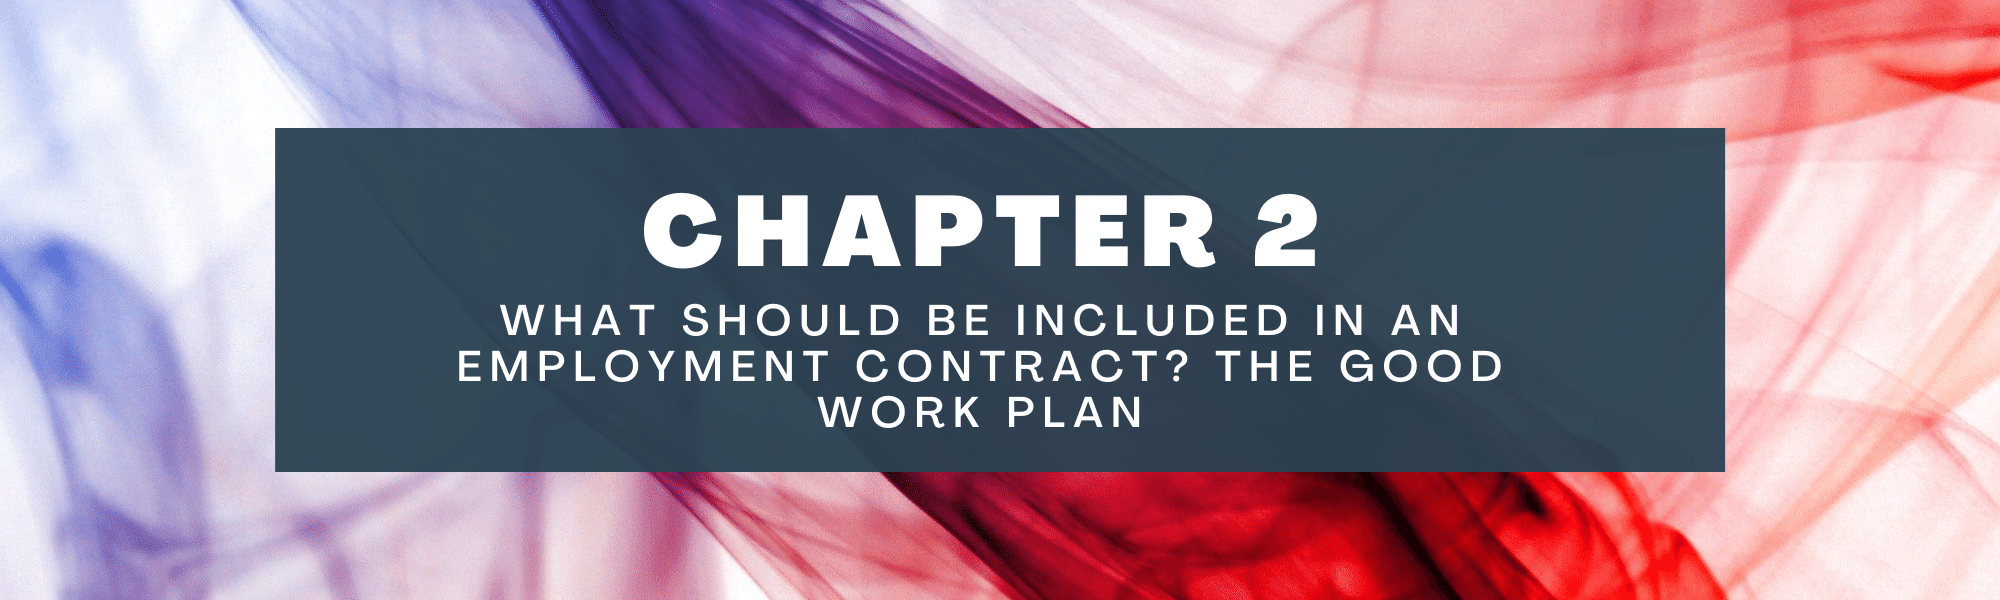 What should be included in an employment contract?